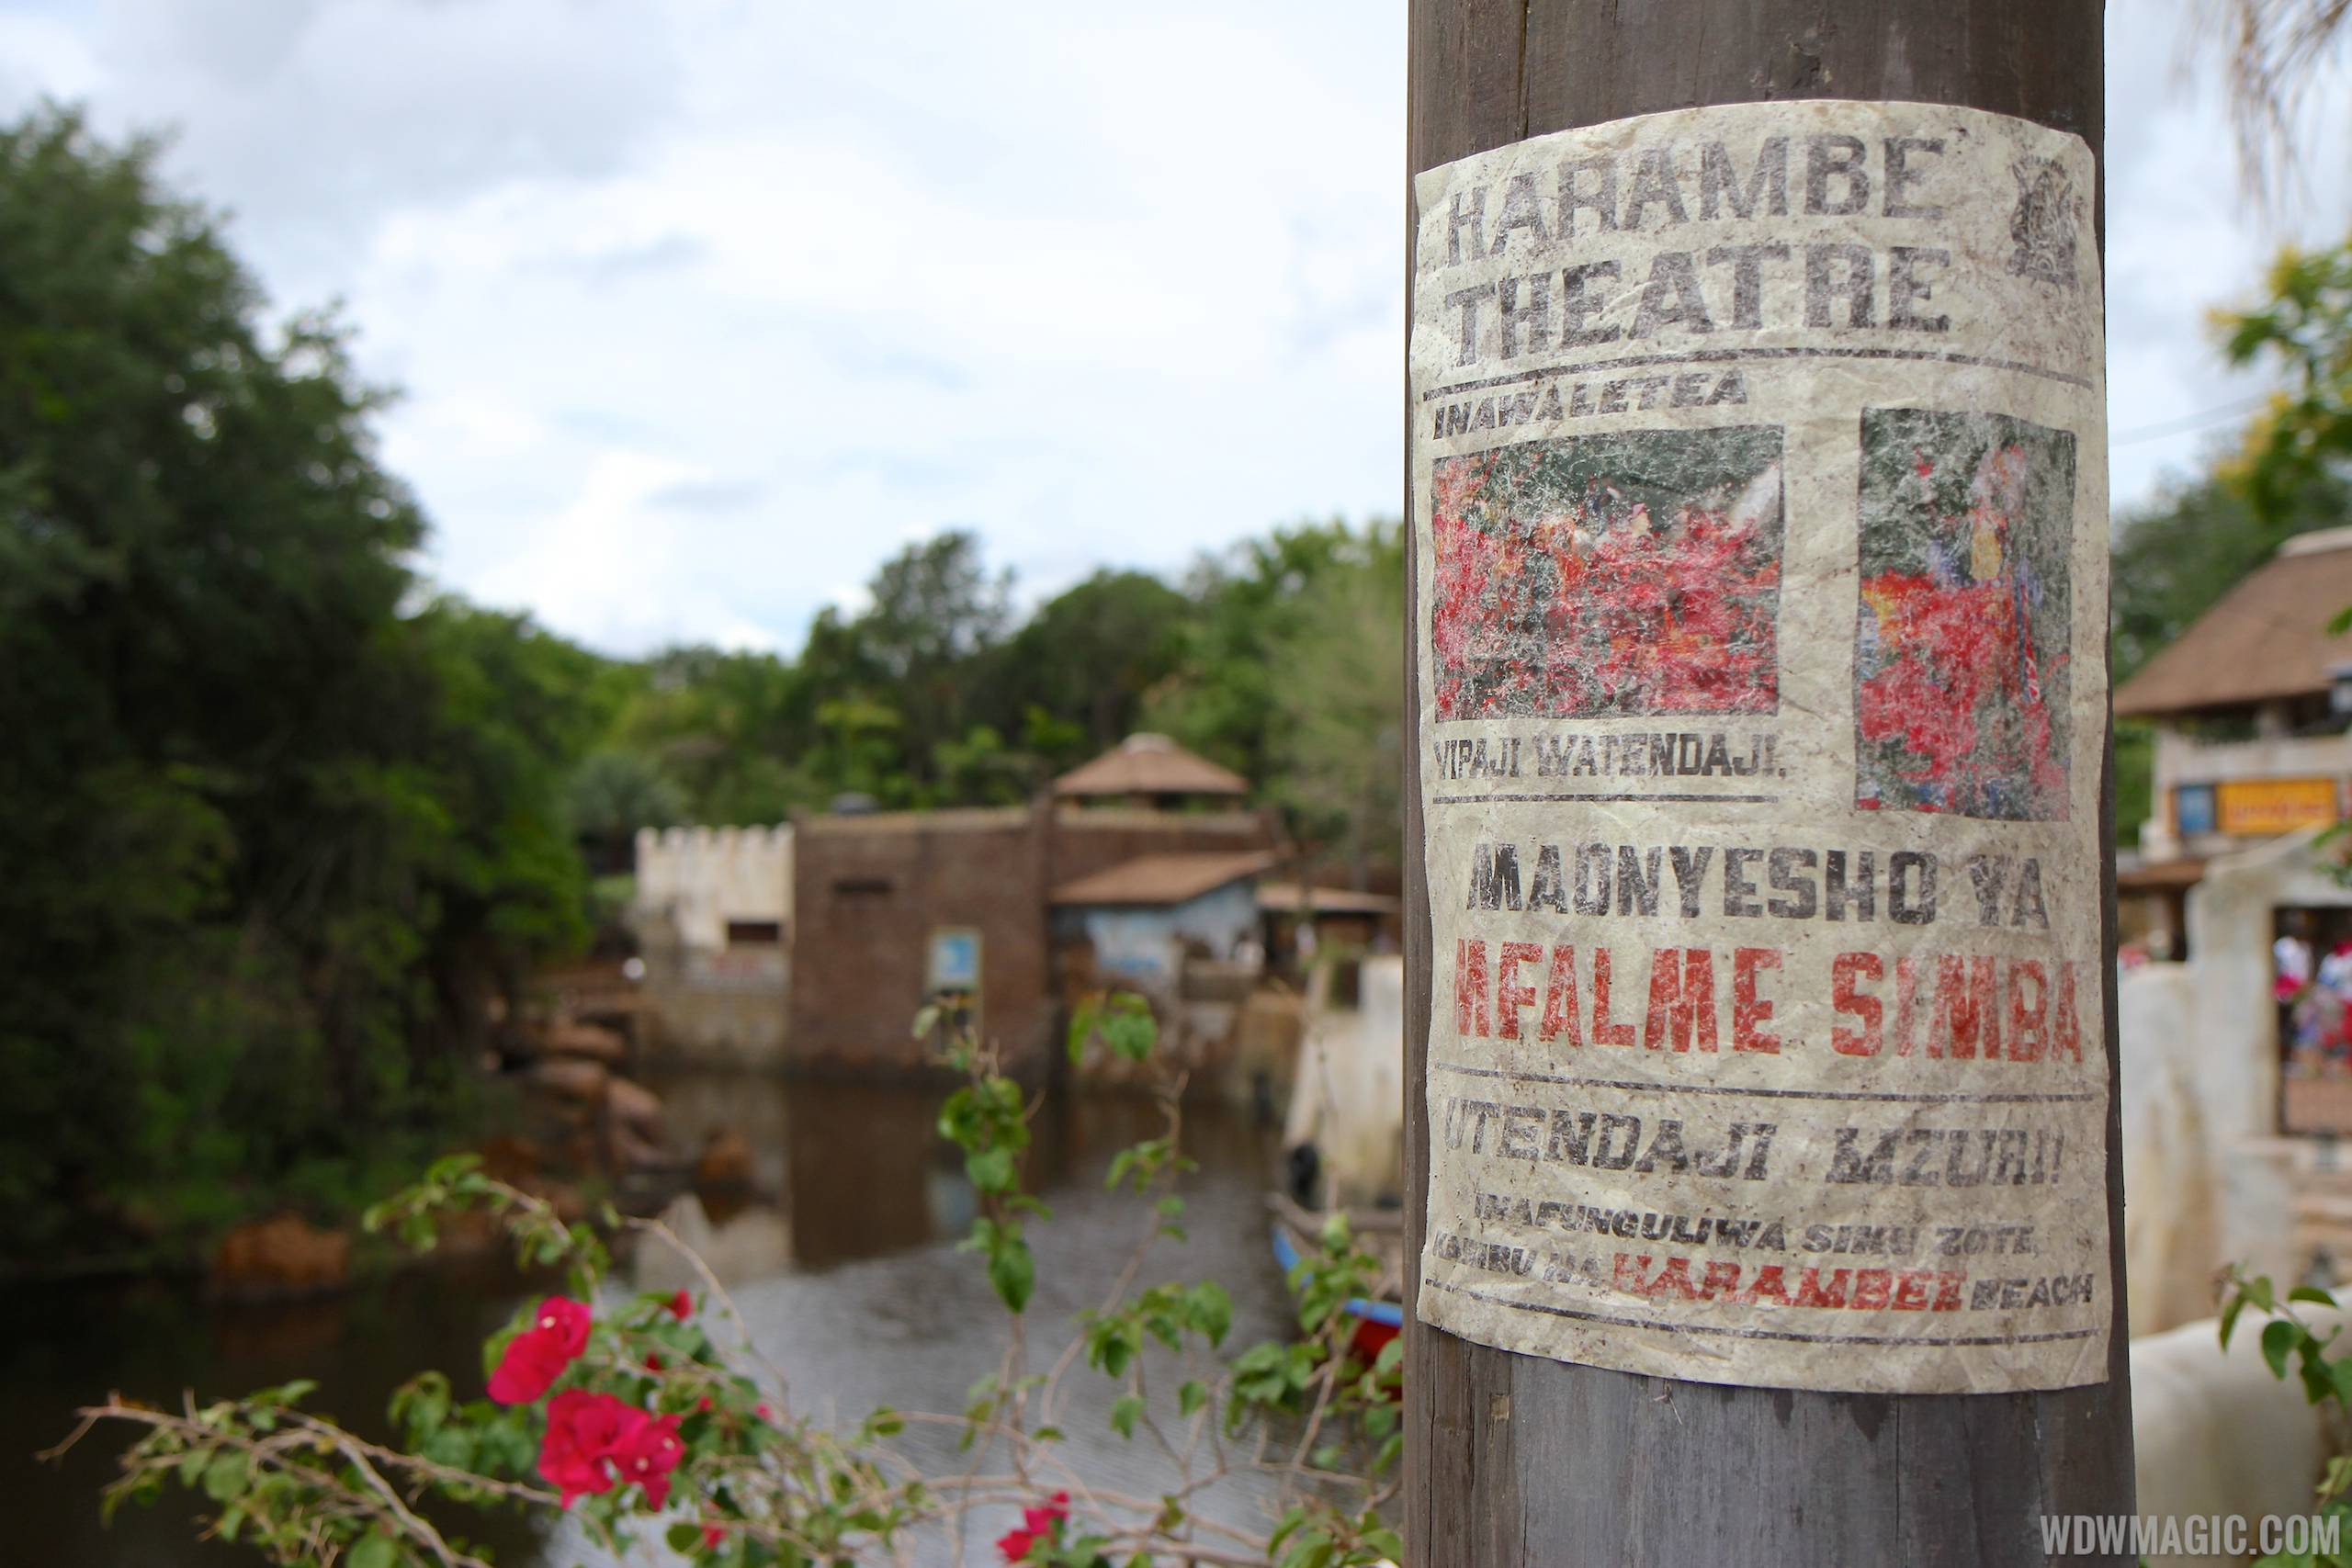 New Harambe Theatre area in Africa - Poster art